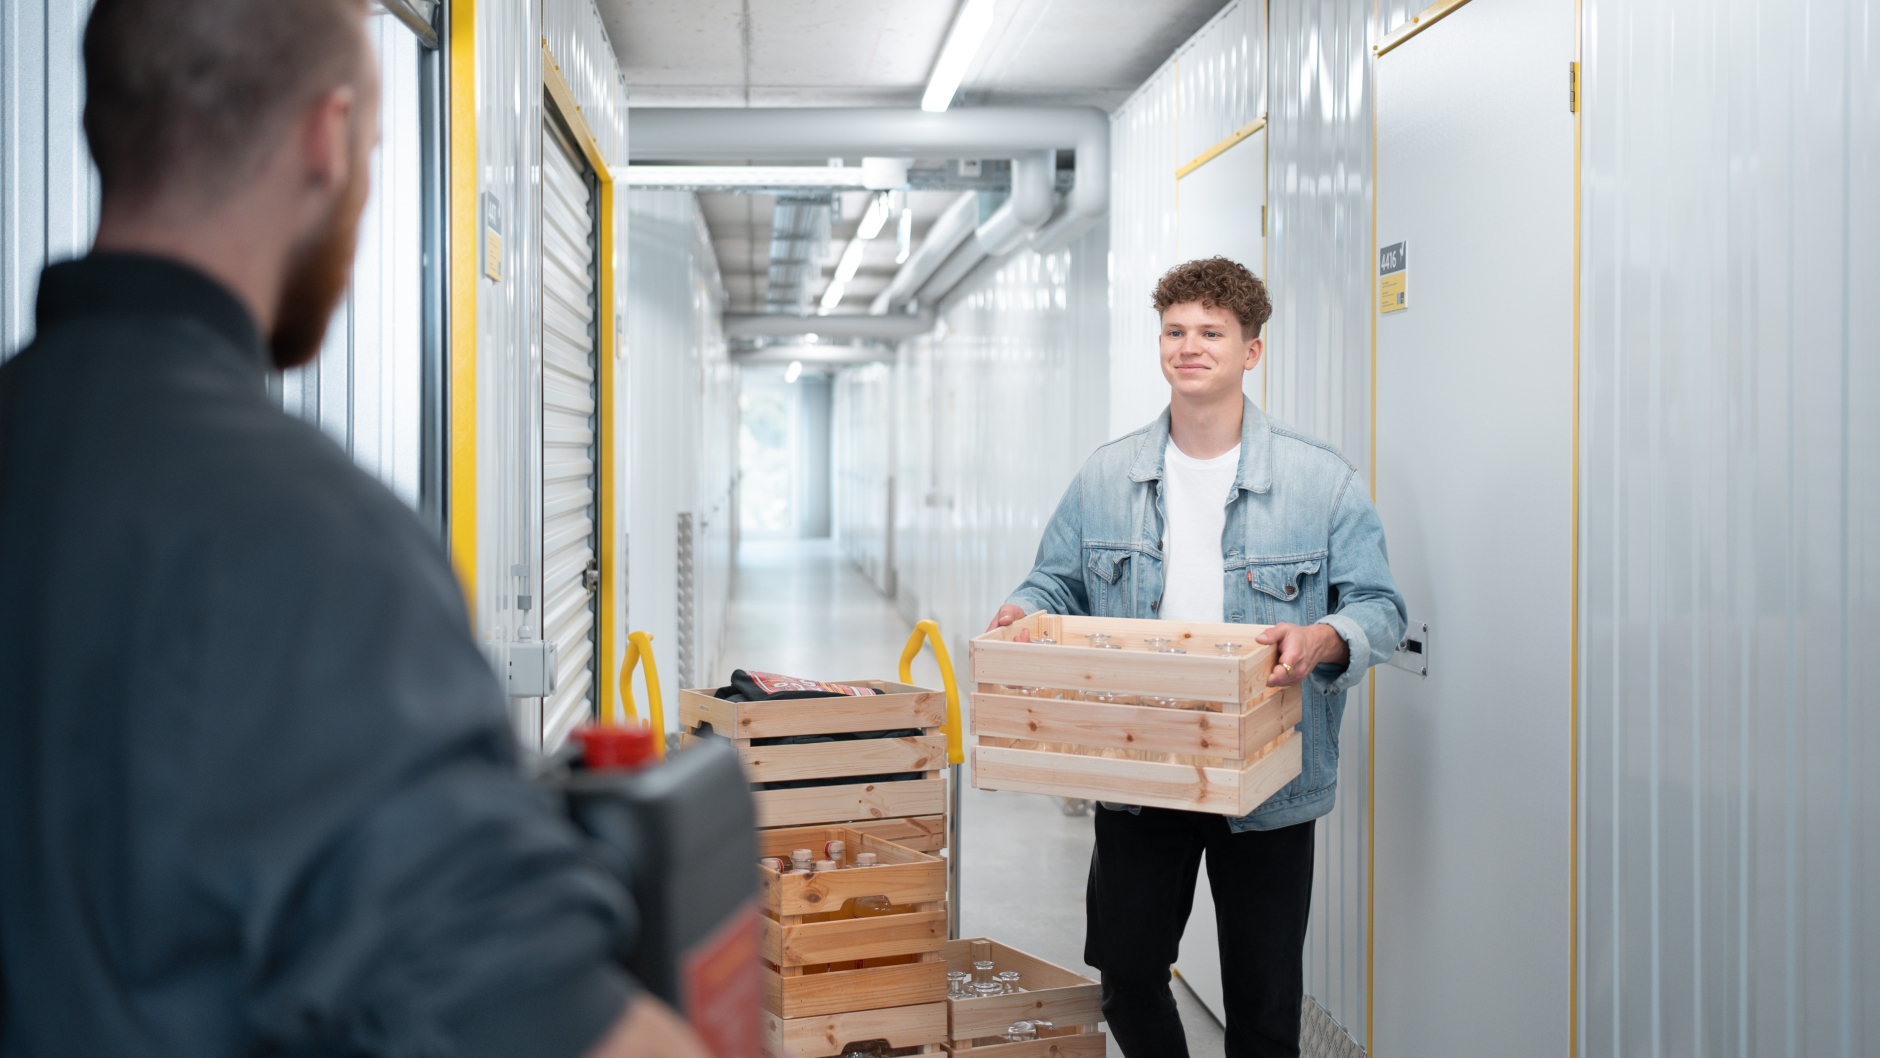 Two young start-up founders are bringing crates and canisters into the Zebrabox storage unit.